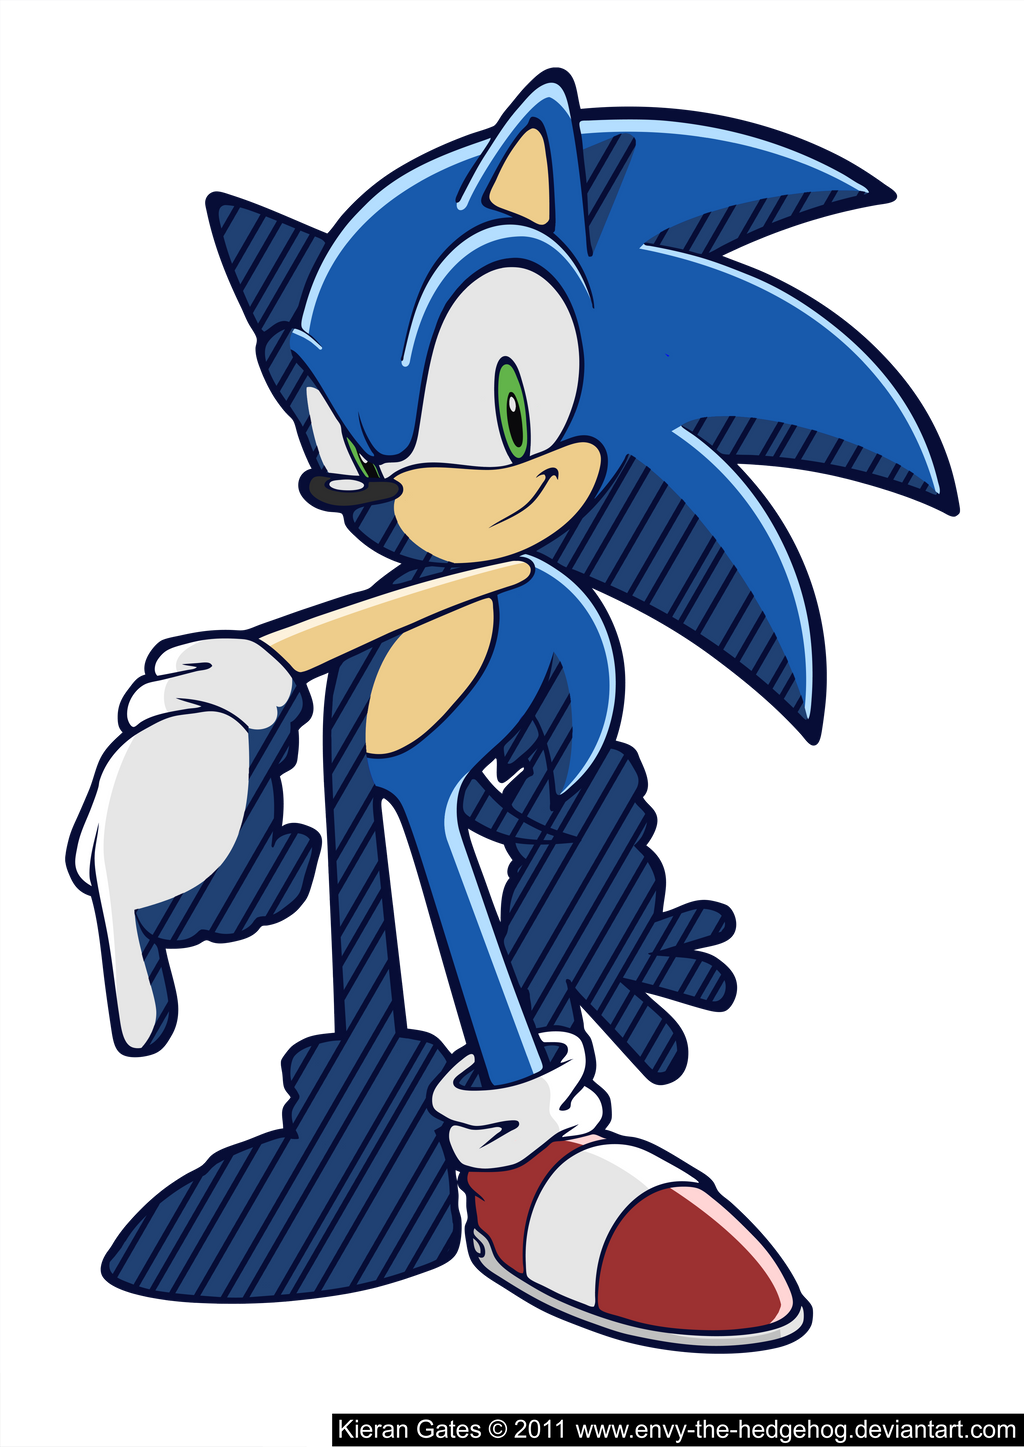 Classic Sonic in the style of Sonic Adventure : r/SonicTheHedgehog